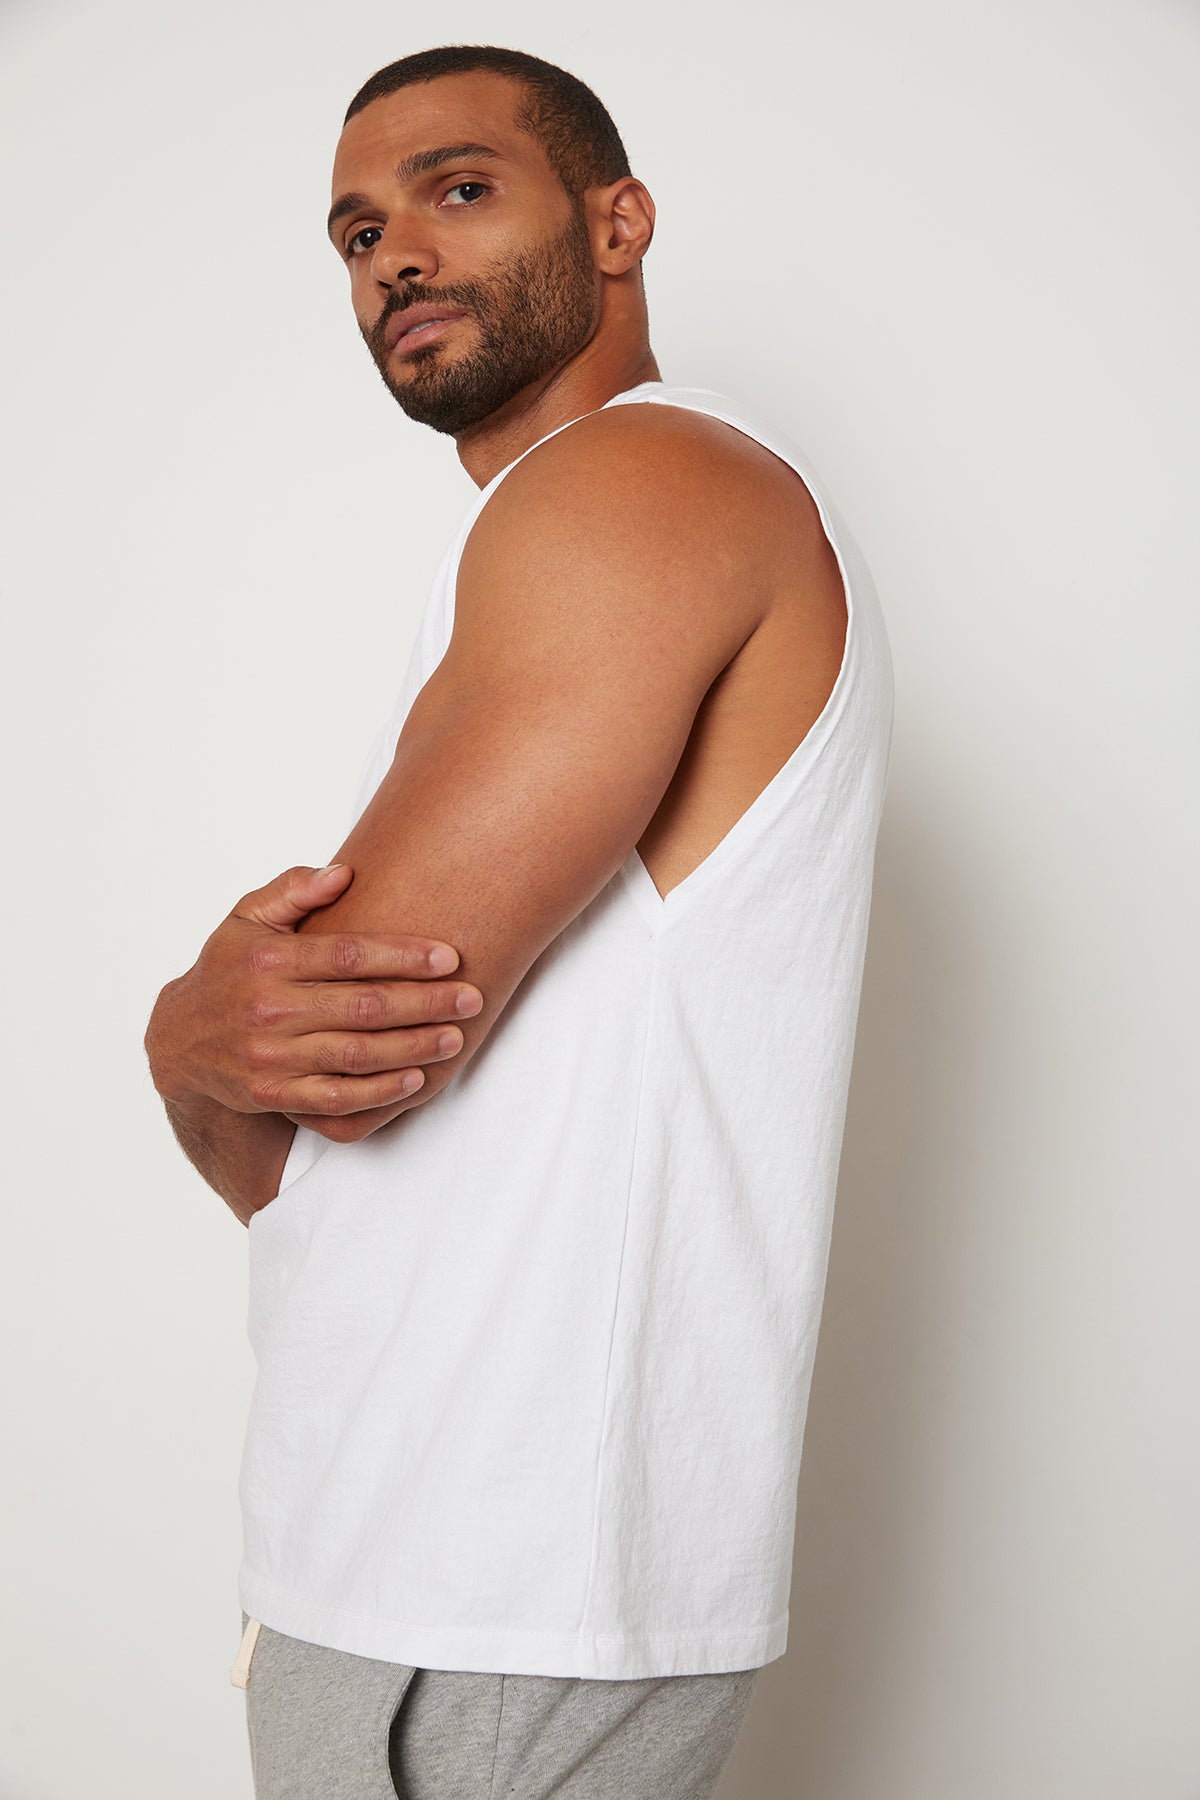   Bodhi Crew Neck Muscle Tee in White Side 